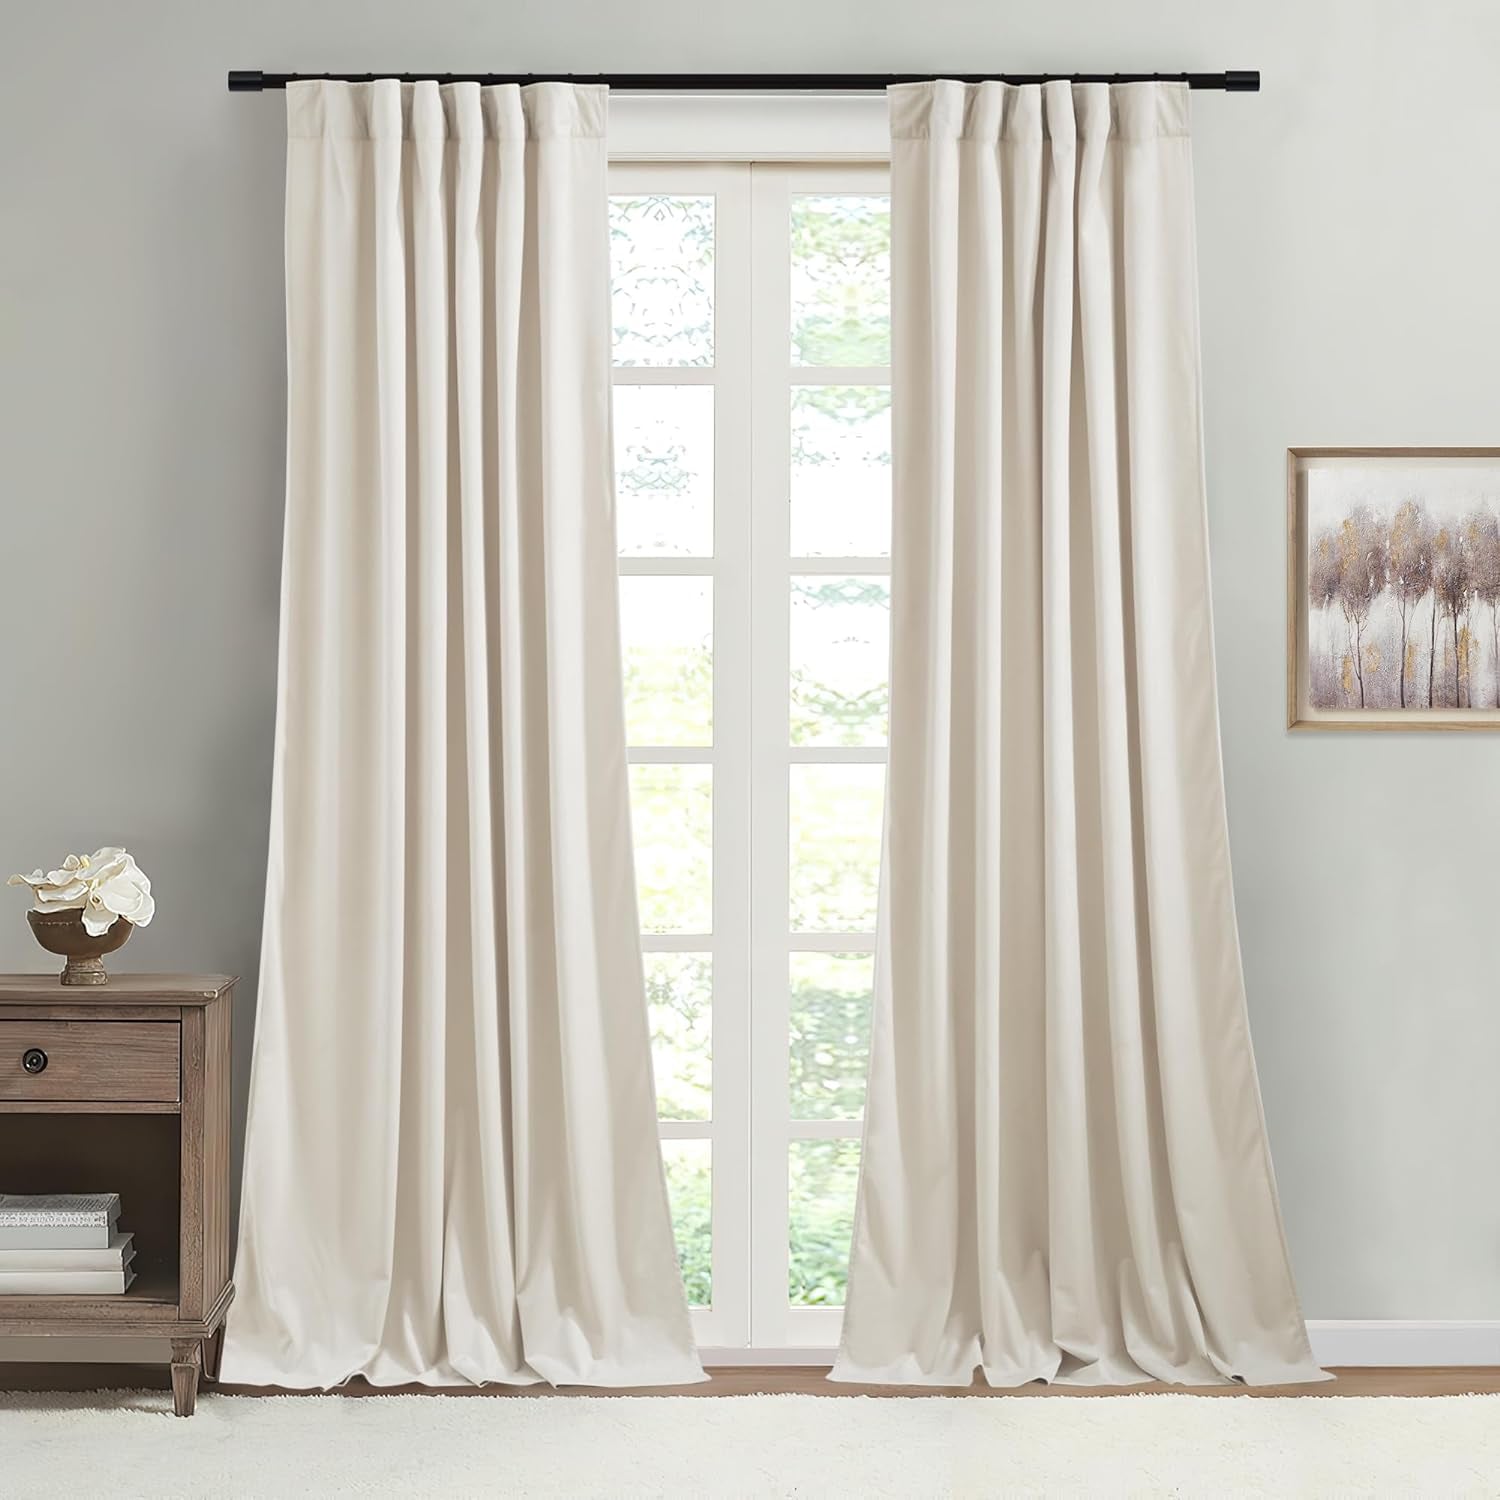 Beige Velvet Curtains, Elegant Home Decor Back Tab Privacy Thermal Insulating Window Drapes, W52 X L84 Inches, 2 Panels